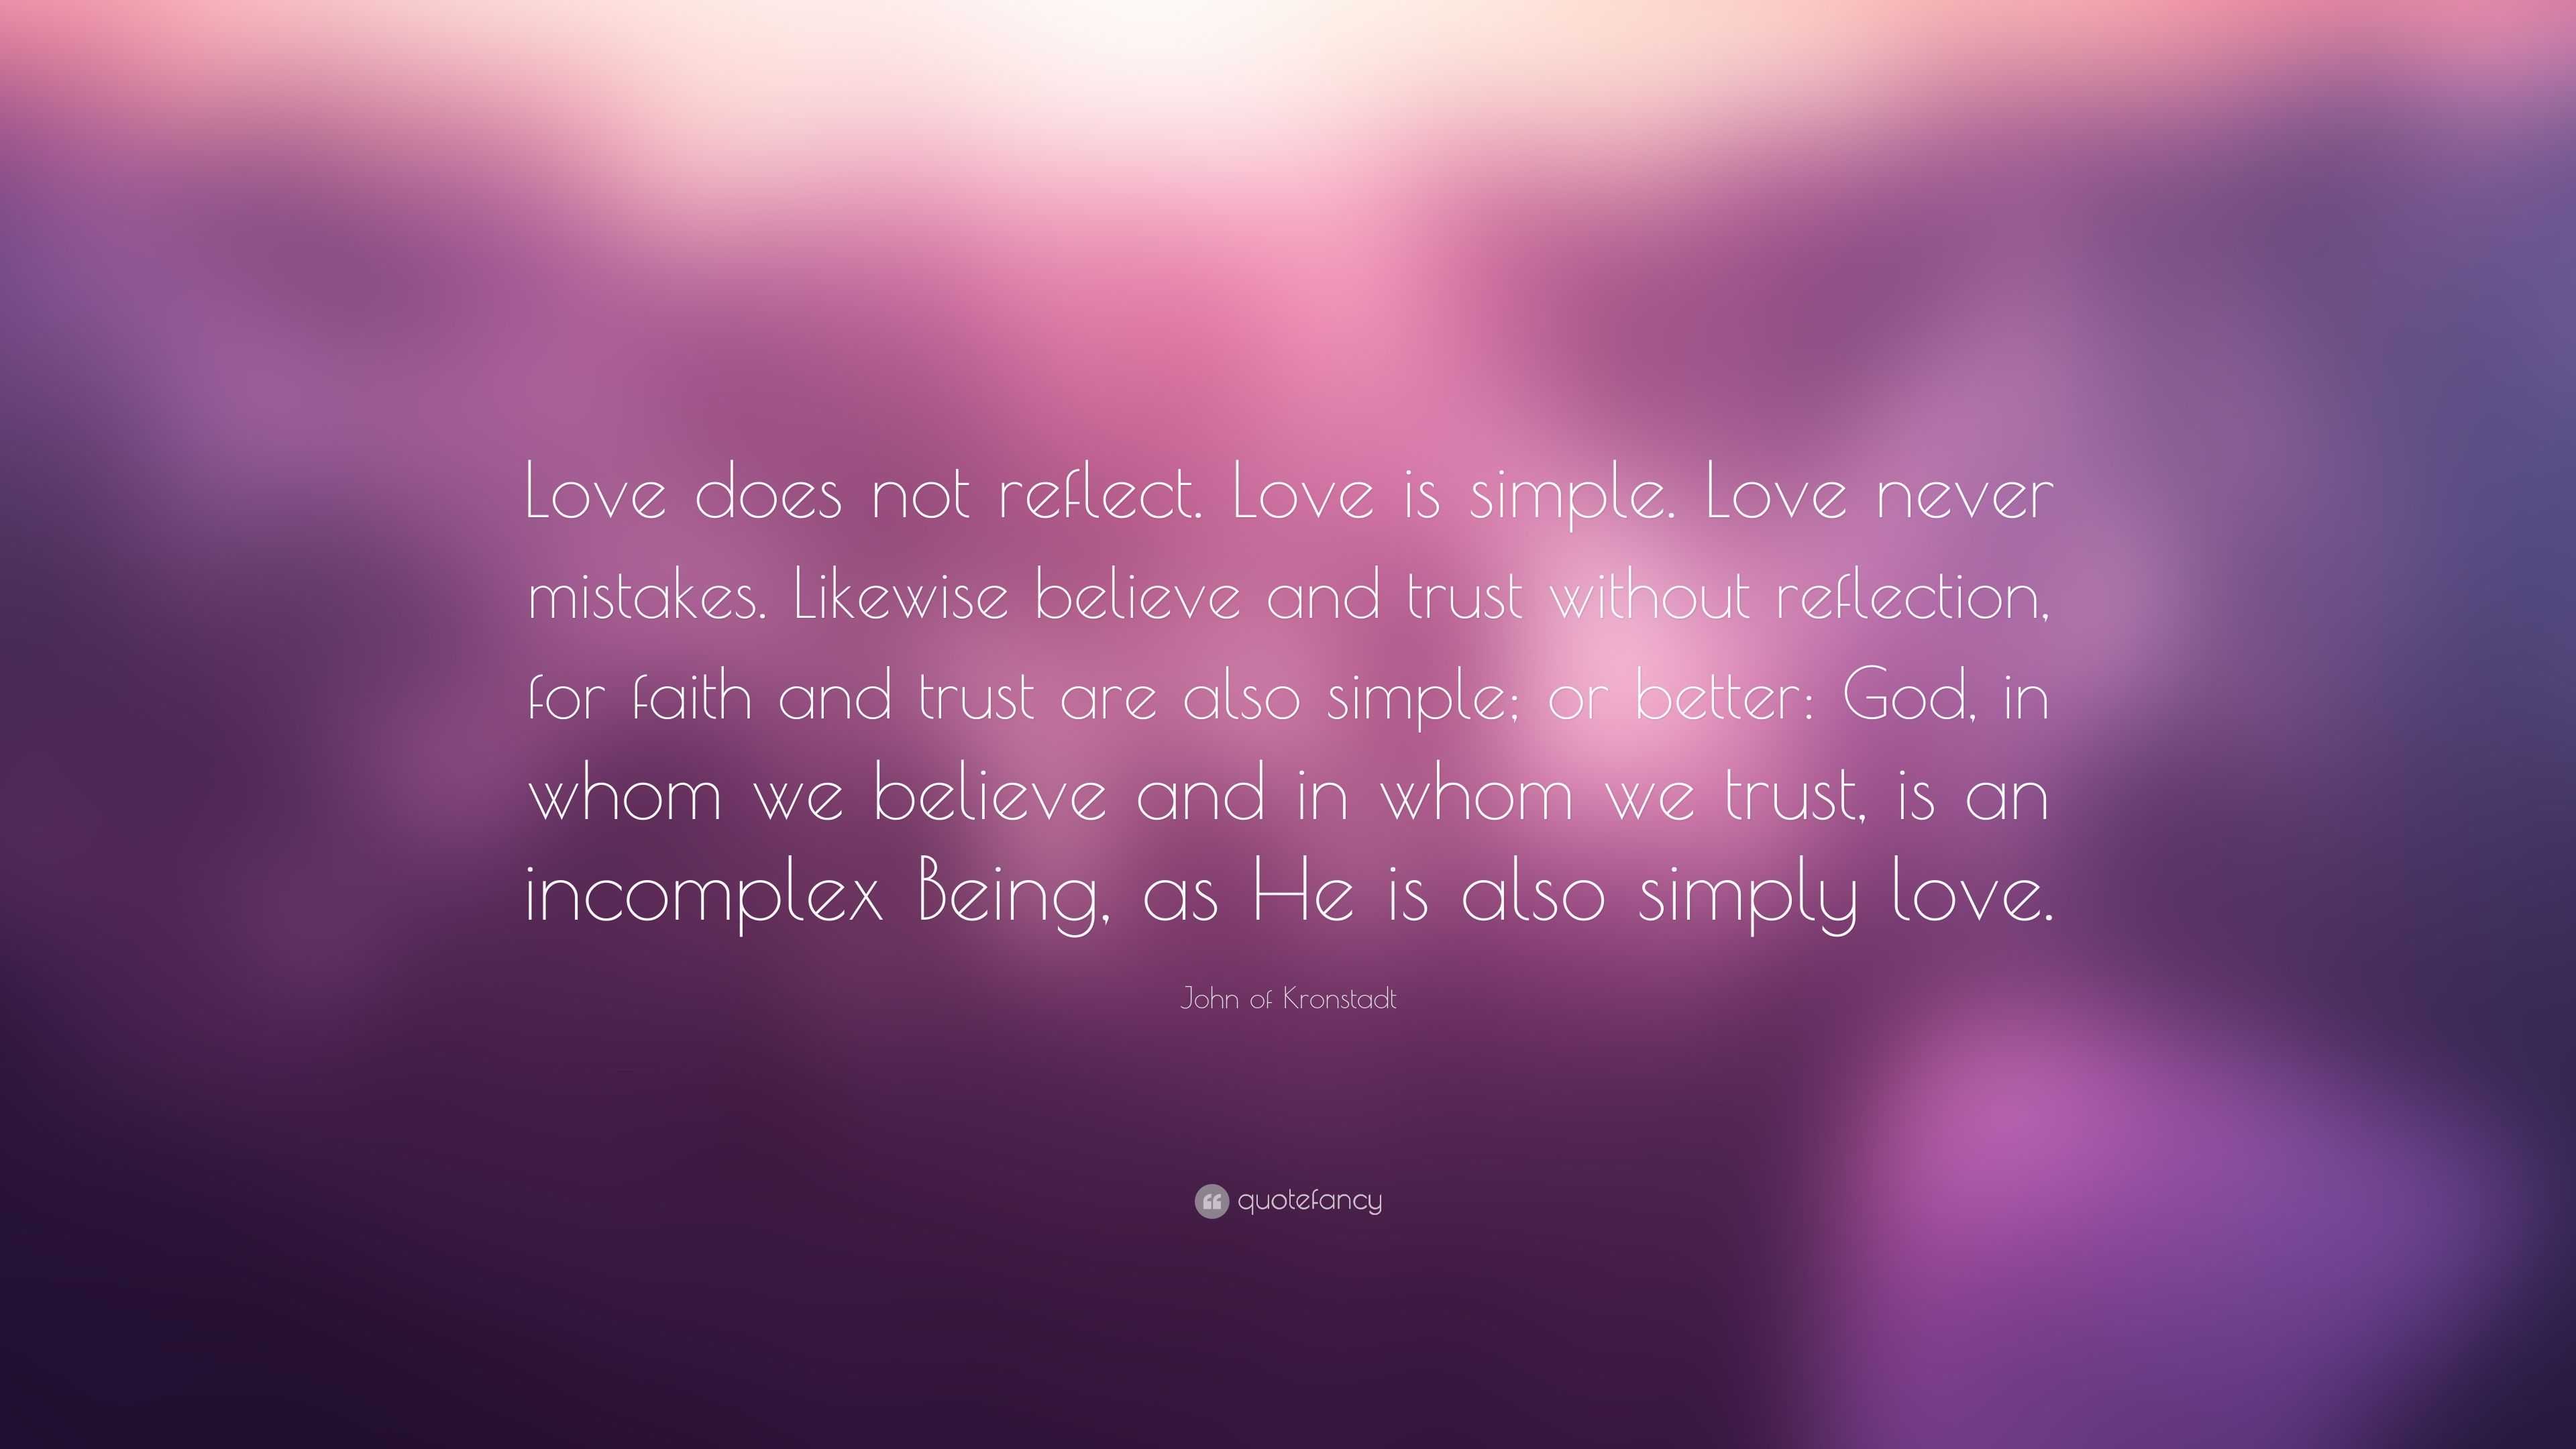 John of Kronstadt Quote: “Love does not reflect. Love is simple. Love ...